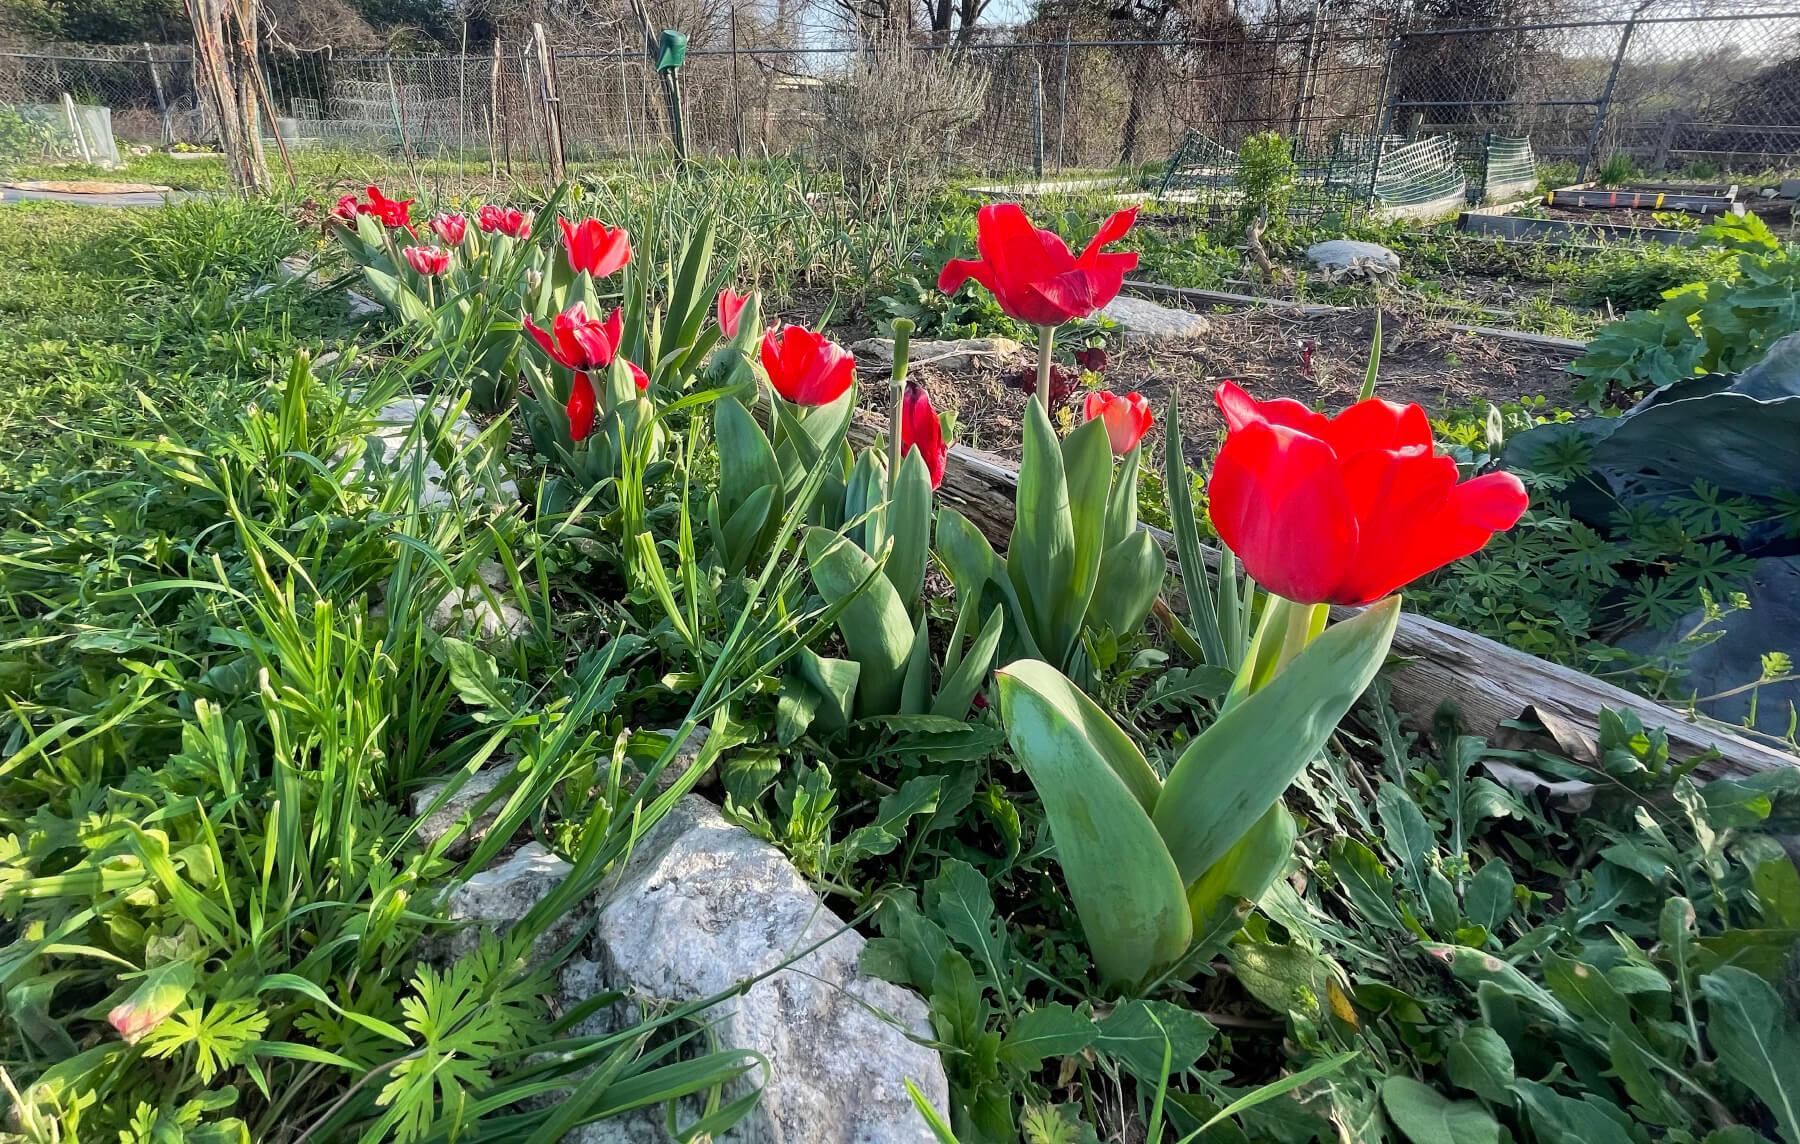 Bright red tulips and green leaves in a garden